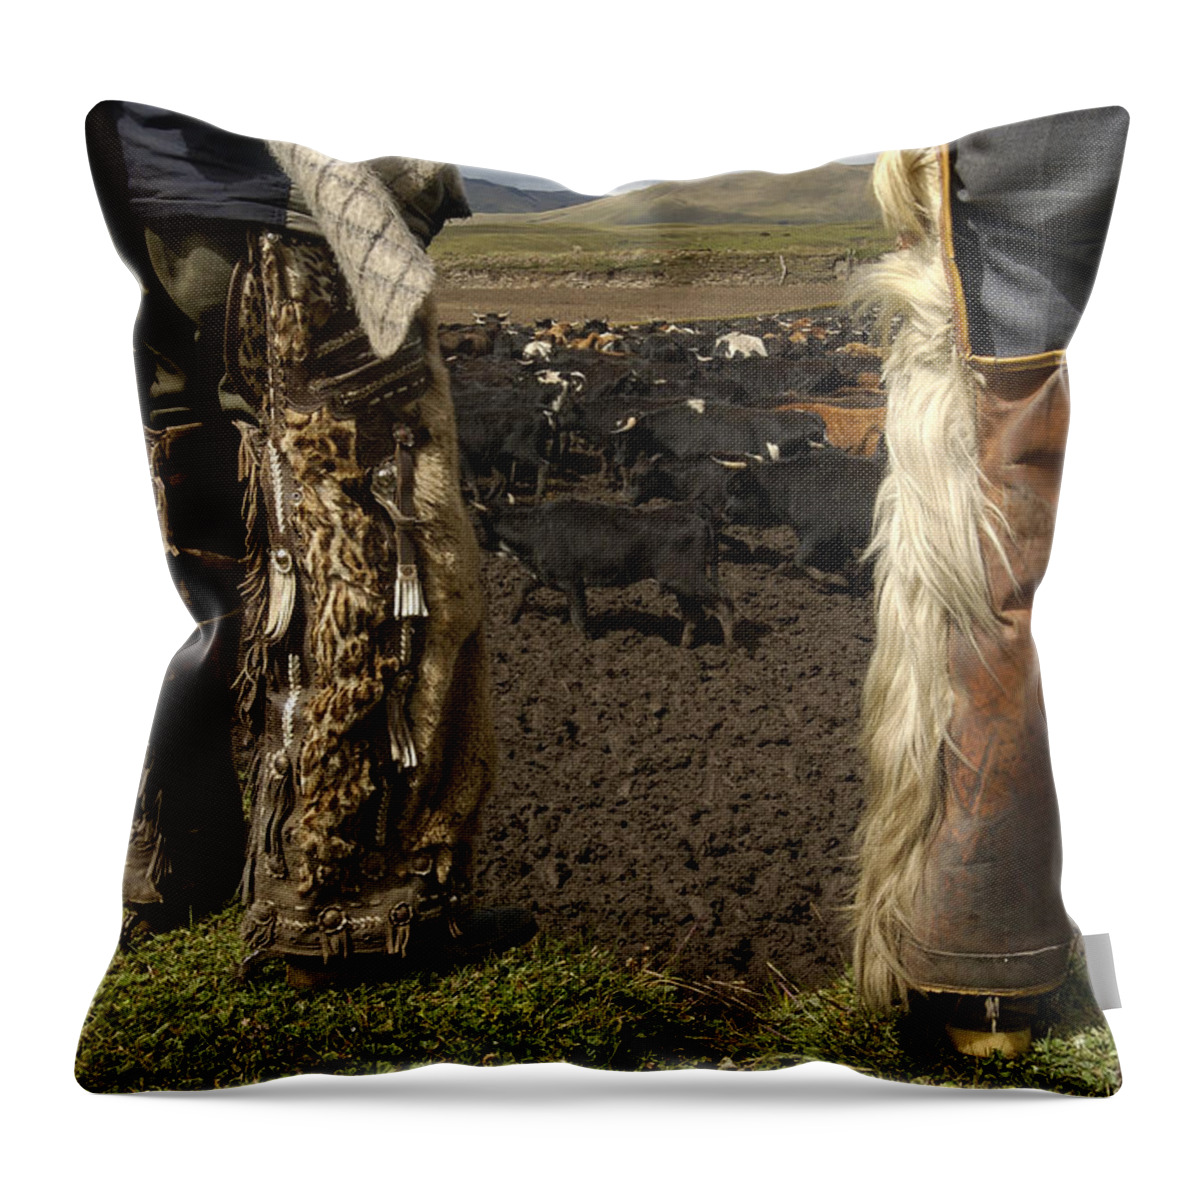 Feb0514 Throw Pillow featuring the photograph Ocelot Fur And Goat Hair Chaps Ecuador by Pete Oxford